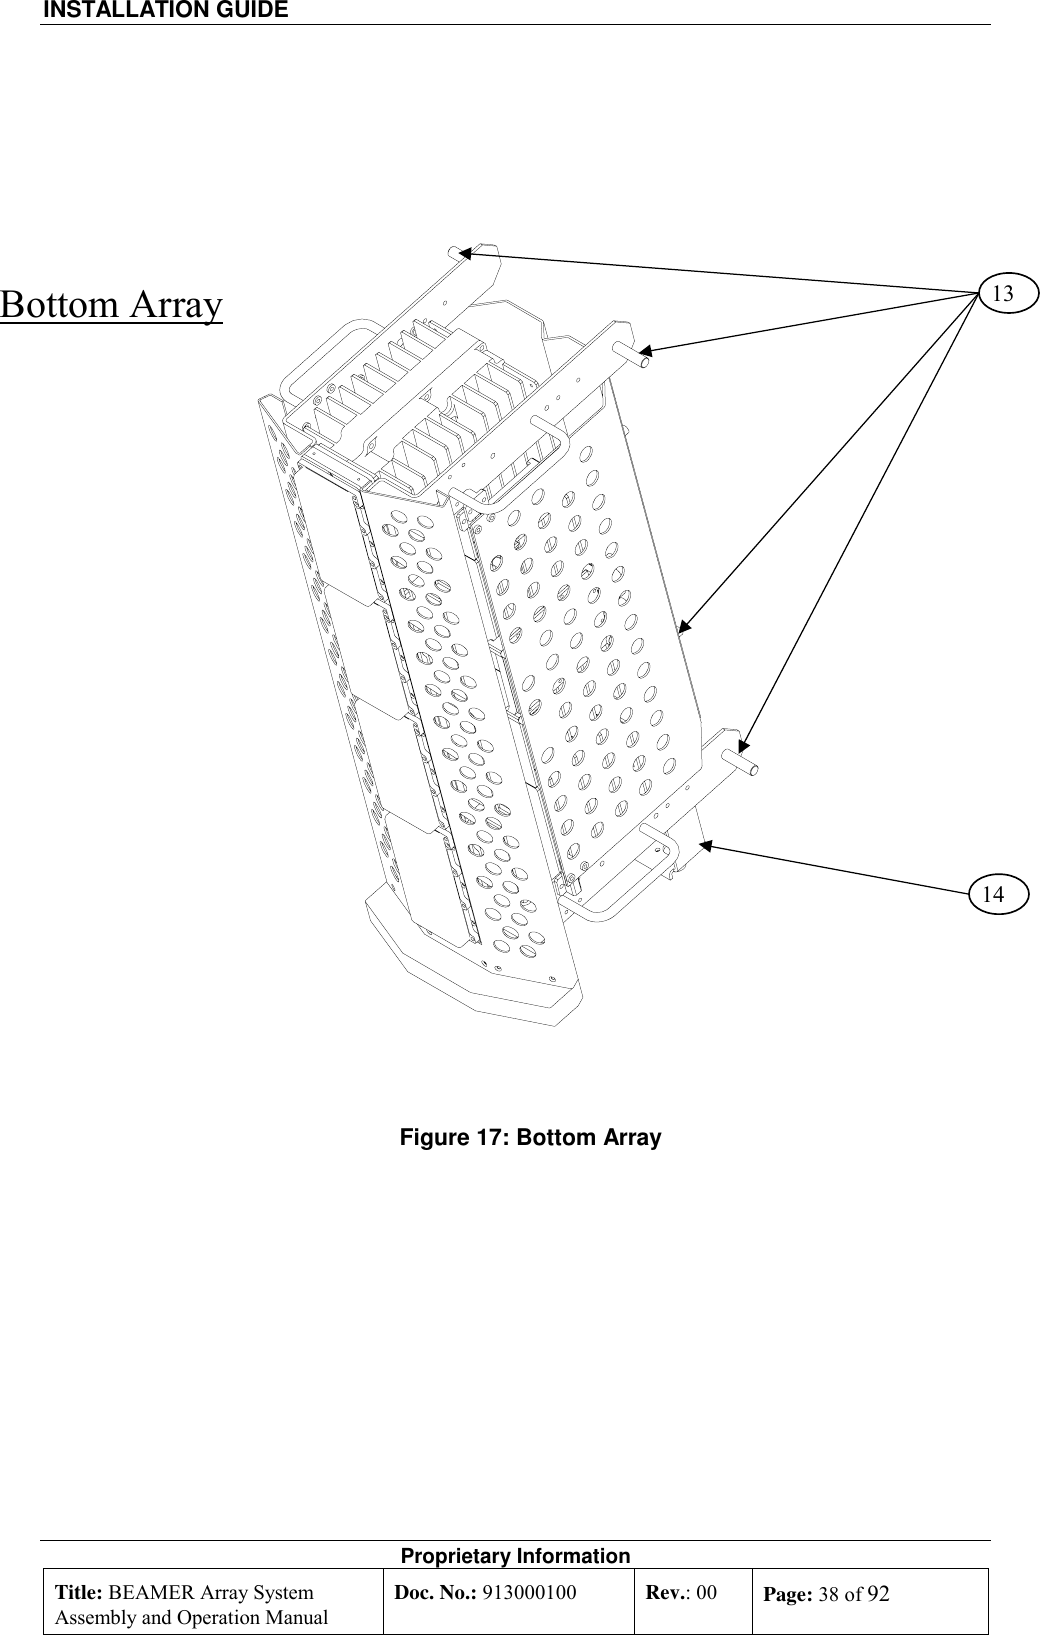 INSTALLATION GUIDE    Proprietary Information Title: BEAMER Array System Assembly and Operation Manual Doc. No.: 913000100  Rev.: 00  Page: 38 of 92       Figure 17: Bottom Array      Bottom Array 1314